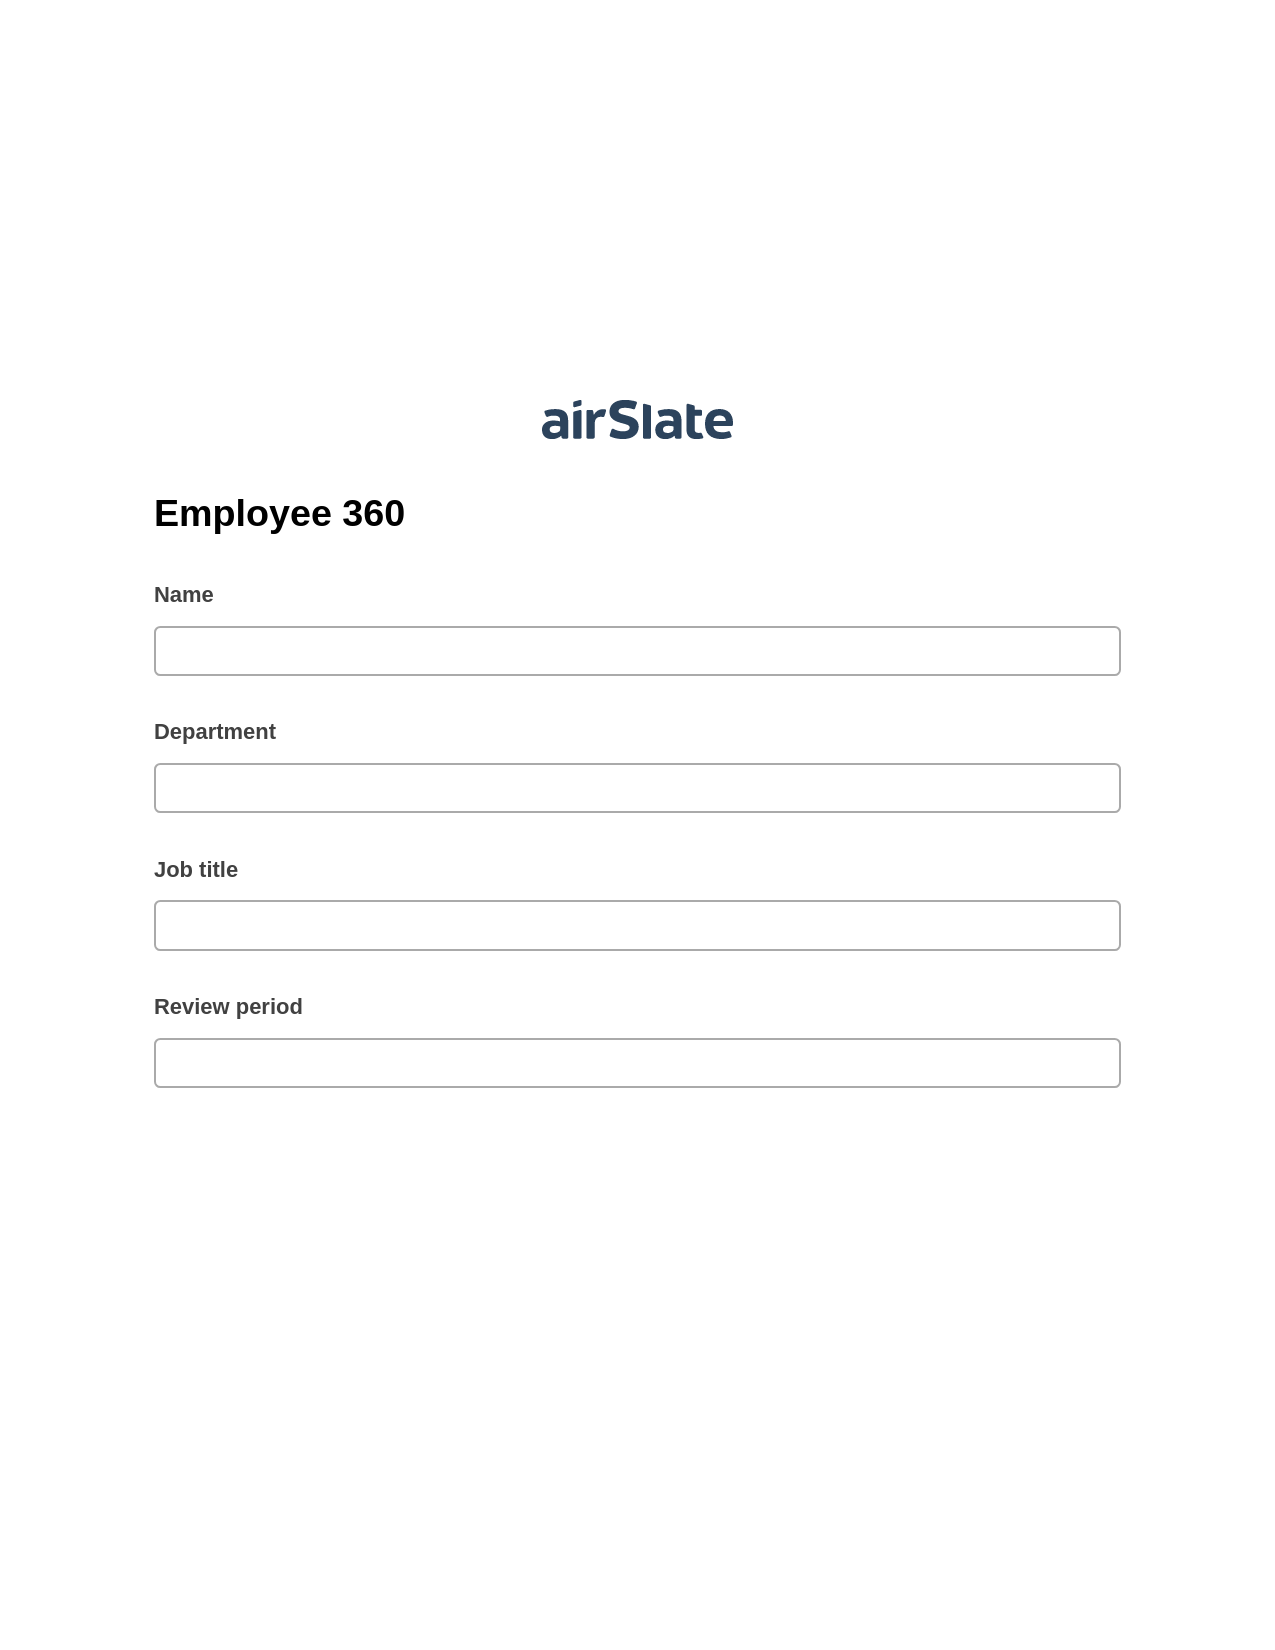 Multirole Employee 360 Pre-fill from MS Dynamics 365 Records, Send a Slate with Roles Bot, Export to WebMerge Bot